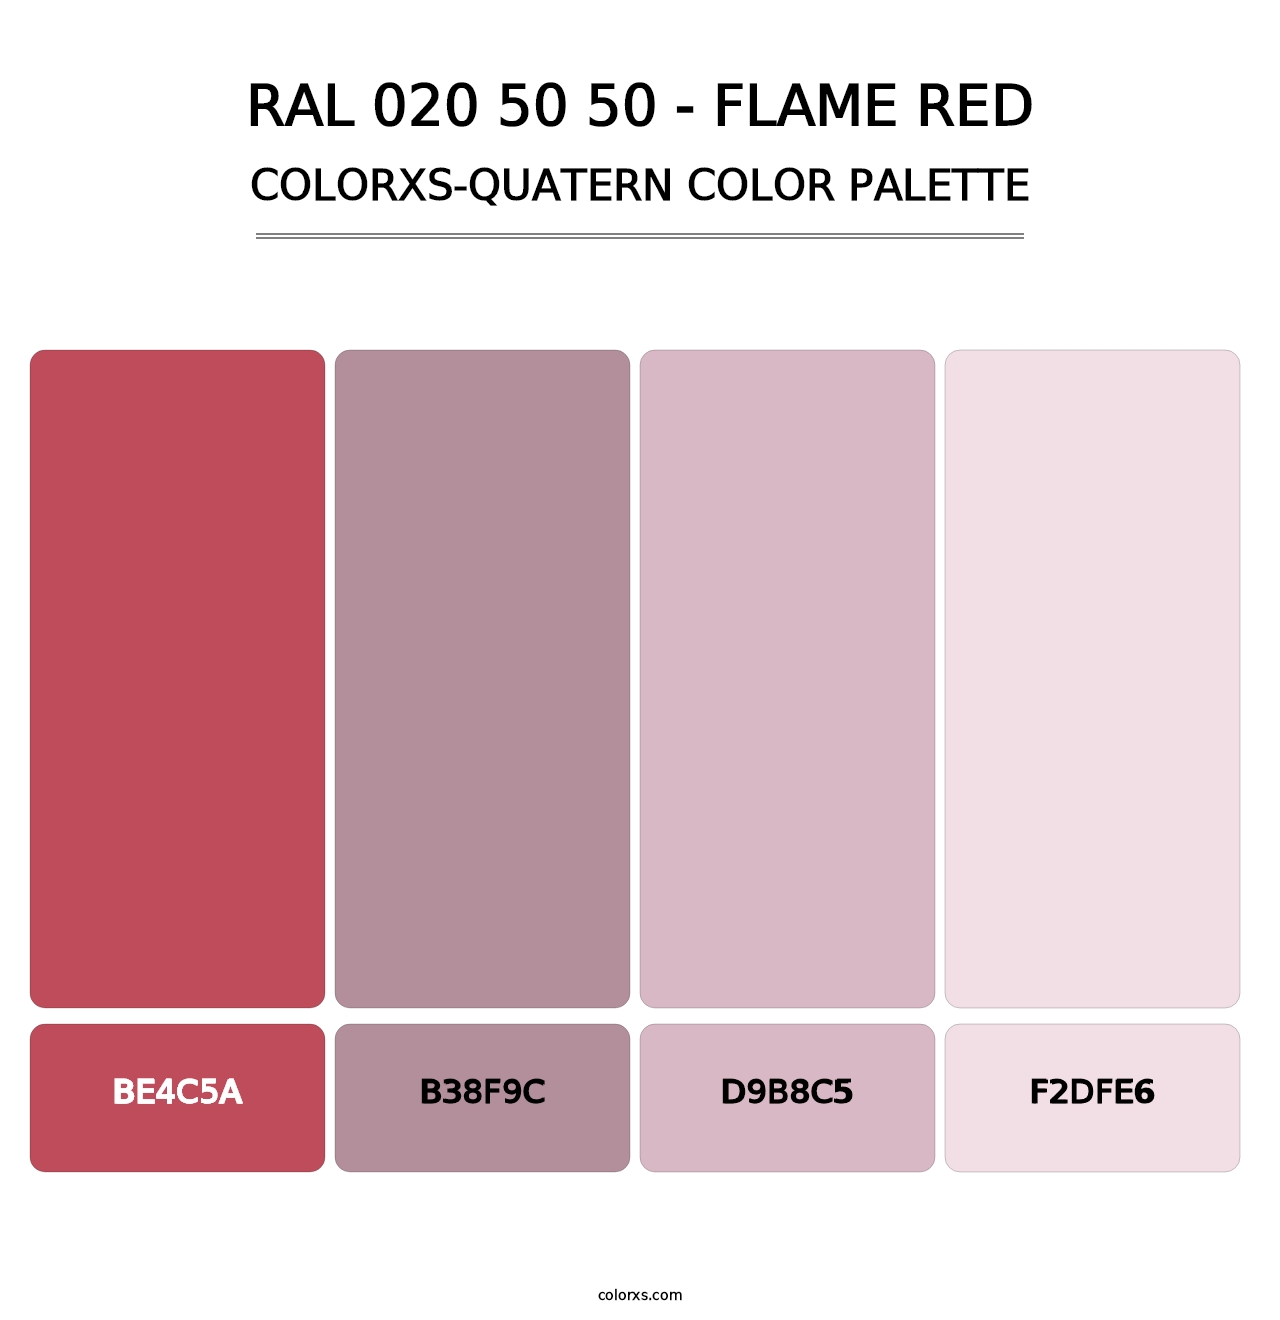 RAL 020 50 50 - Flame Red - Colorxs Quatern Palette